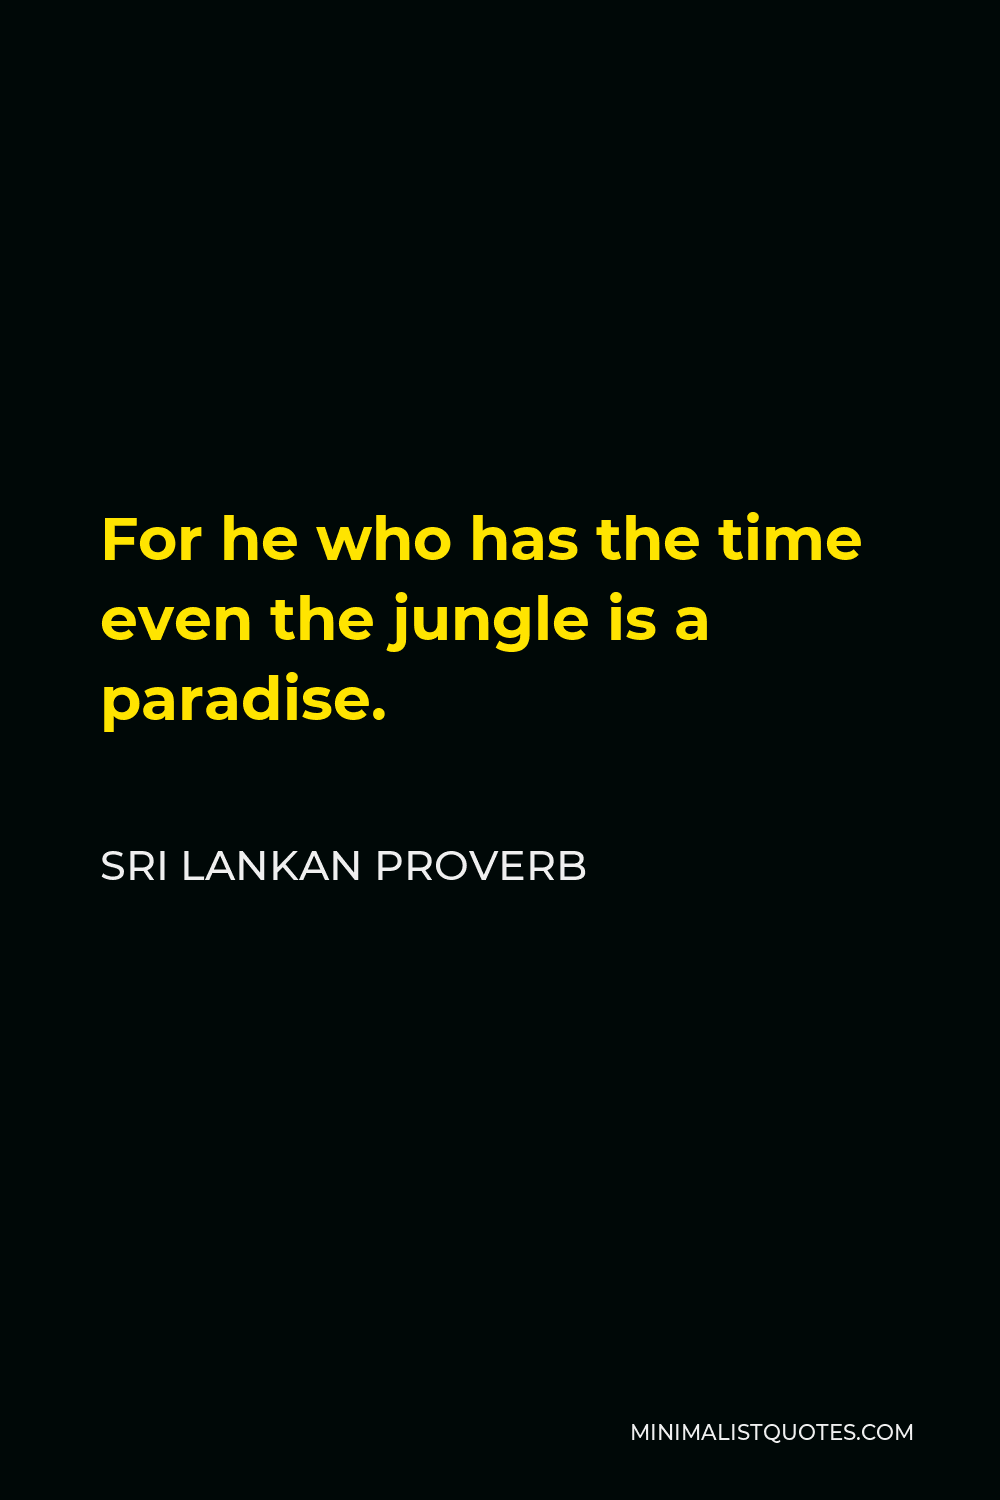 Sri Lankan Proverb Quote - For he who has the time even the jungle is a paradise.